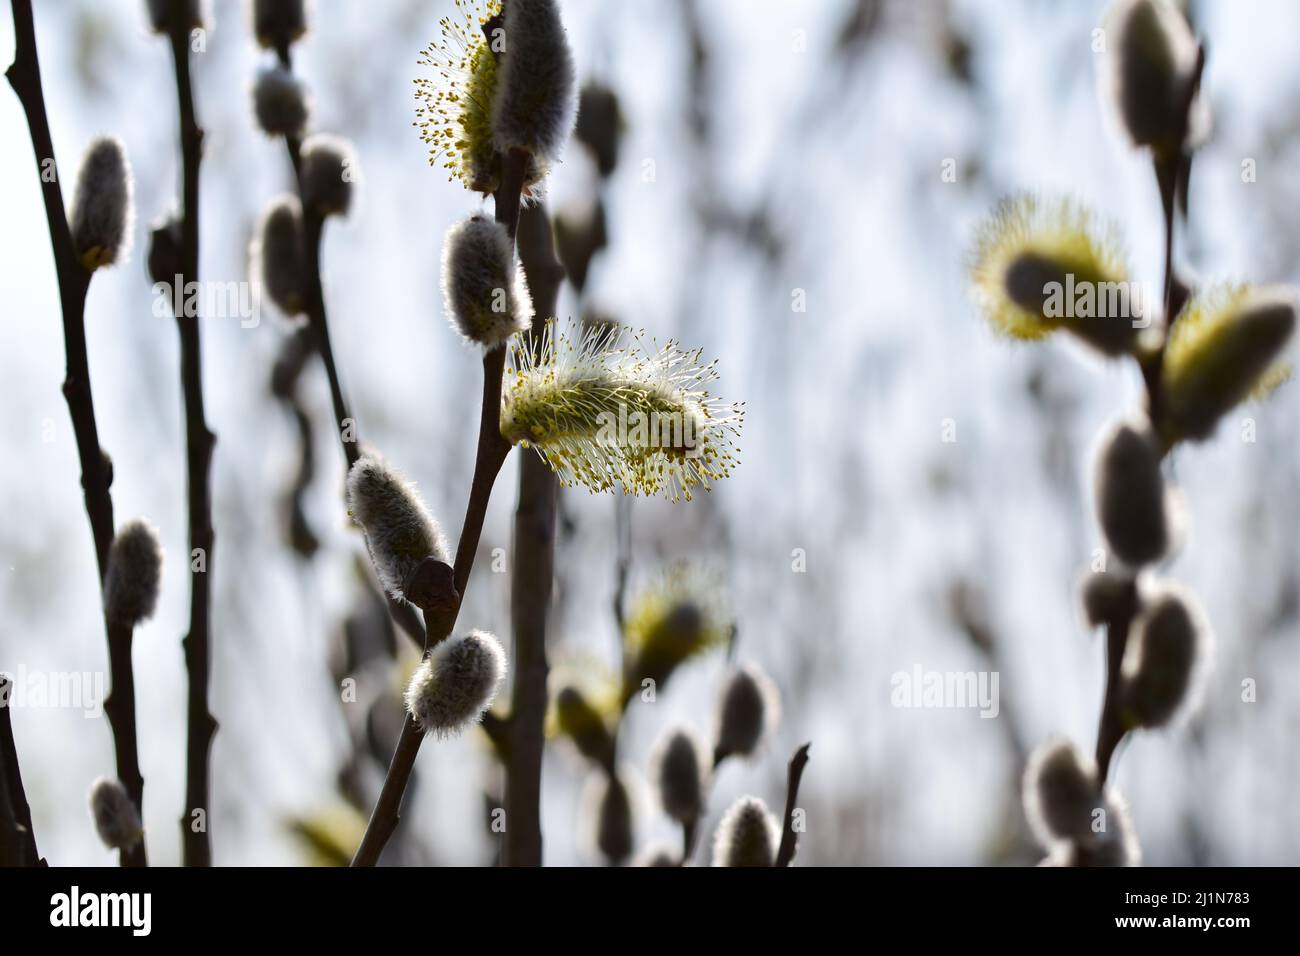 Flowering willow salix salicaceae as a closeup with a various of focuses Stock Photo